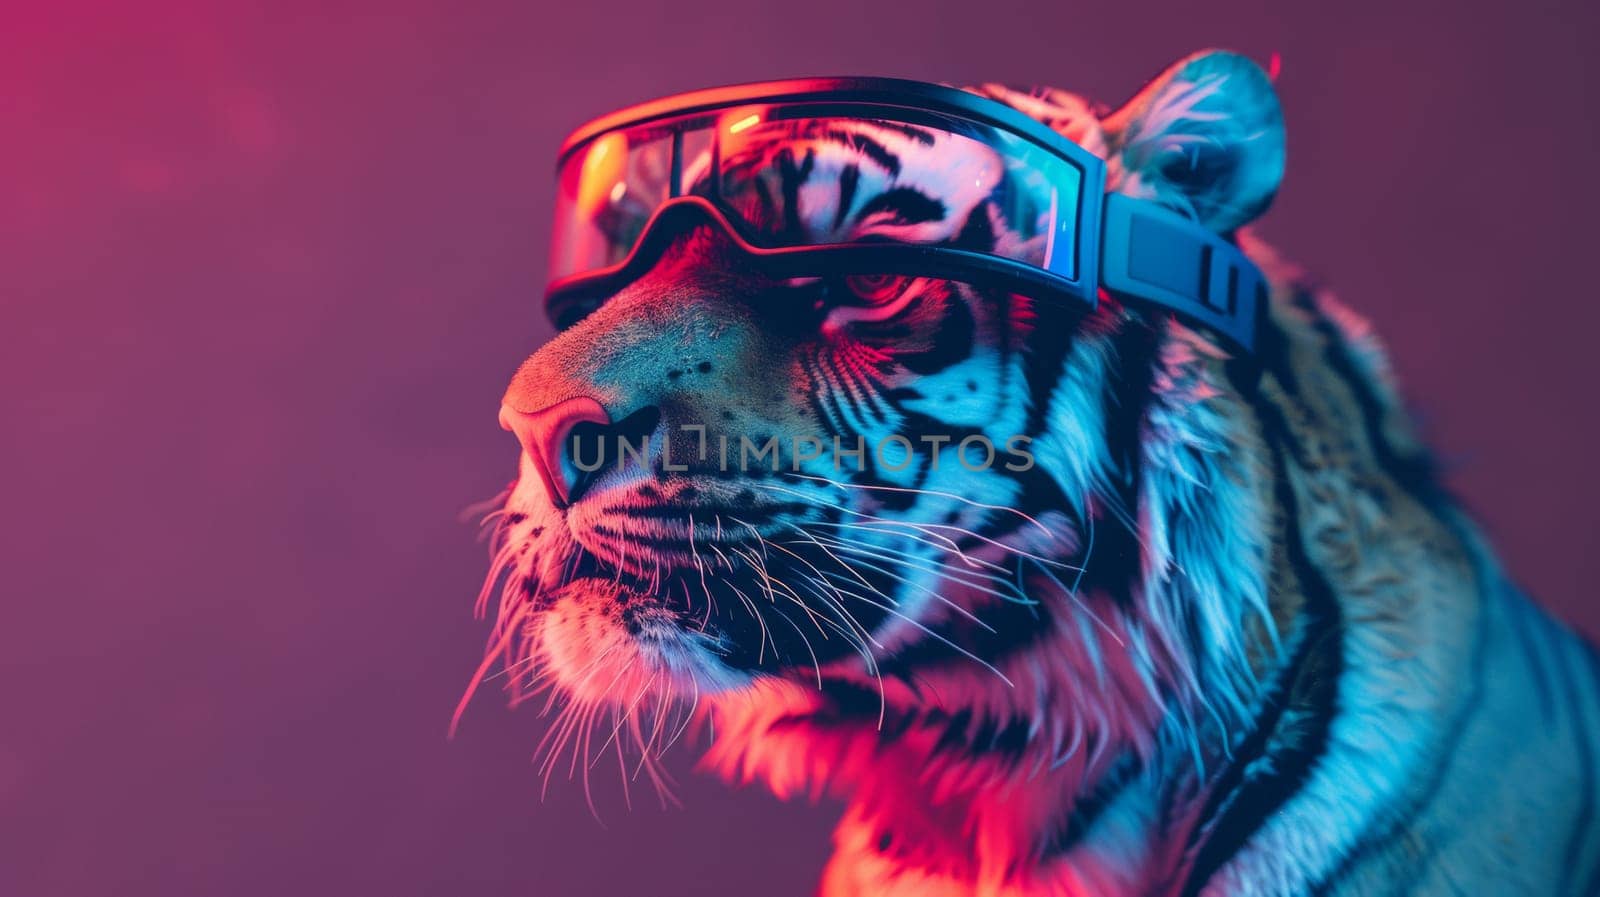 A tiger wearing goggles and a red shirt with sunglasses